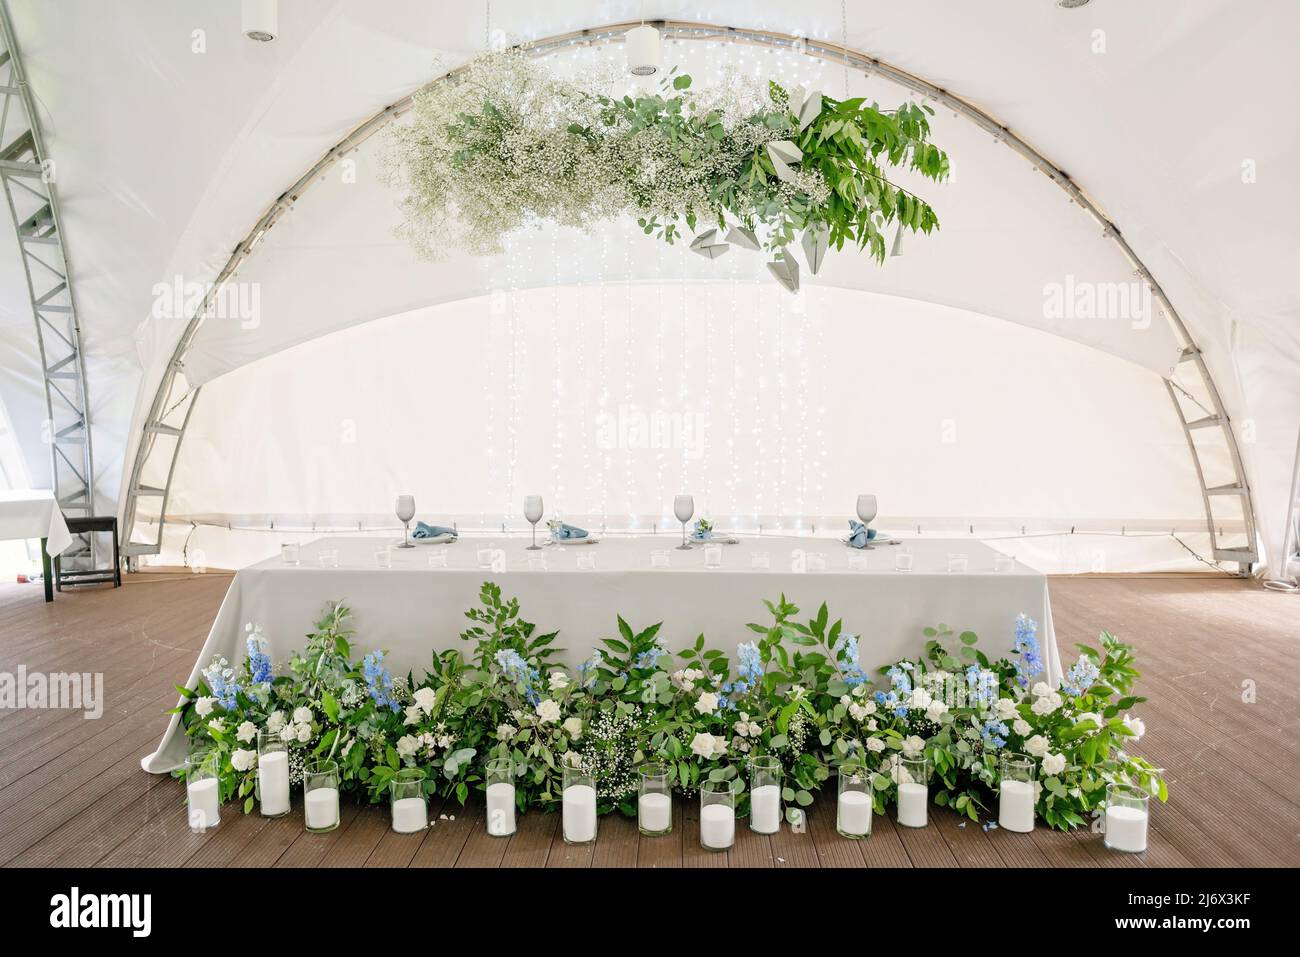 Wedding presidium in restaurant. Banquet table for newlyweds with flowers, greenery, candles and garland ligths. Lush floral arrangement. Luxury weddi Stock Photo